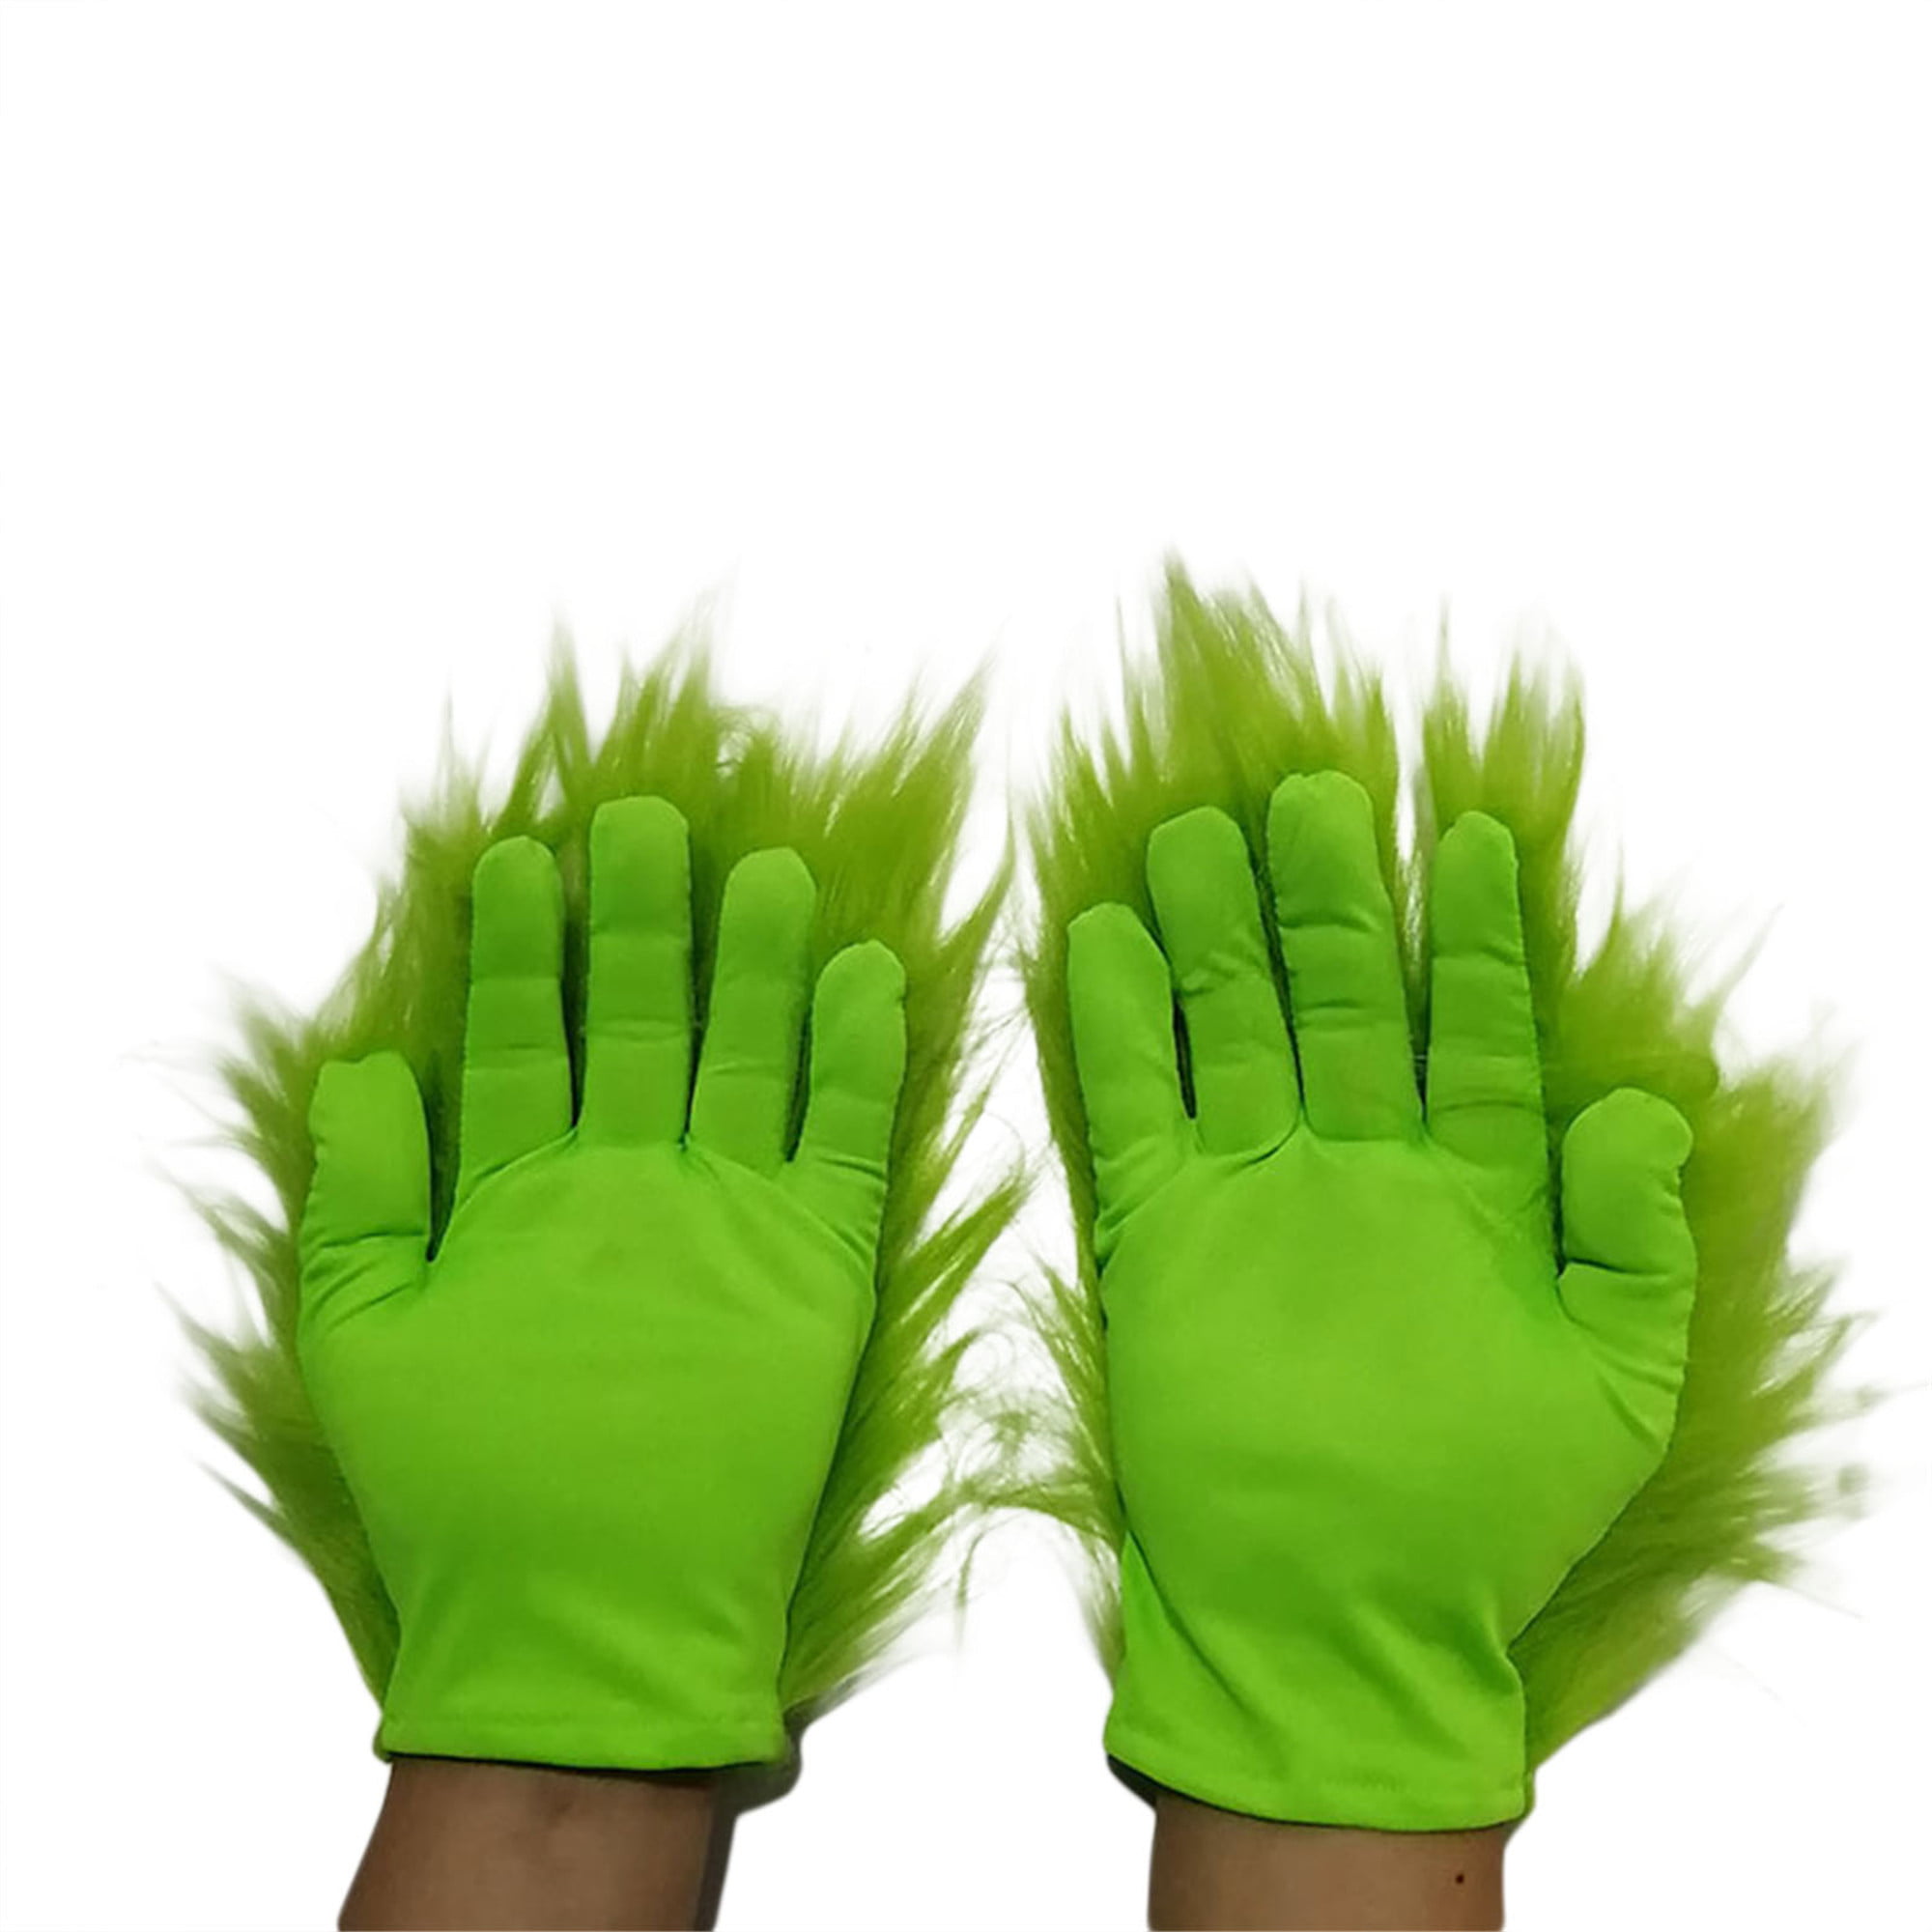 1 Pair Green Furry Gloves Christmas Halloween Party Cosplay Props Grinch Costume Accessories for Adults Kids Grinch Costume Gloves